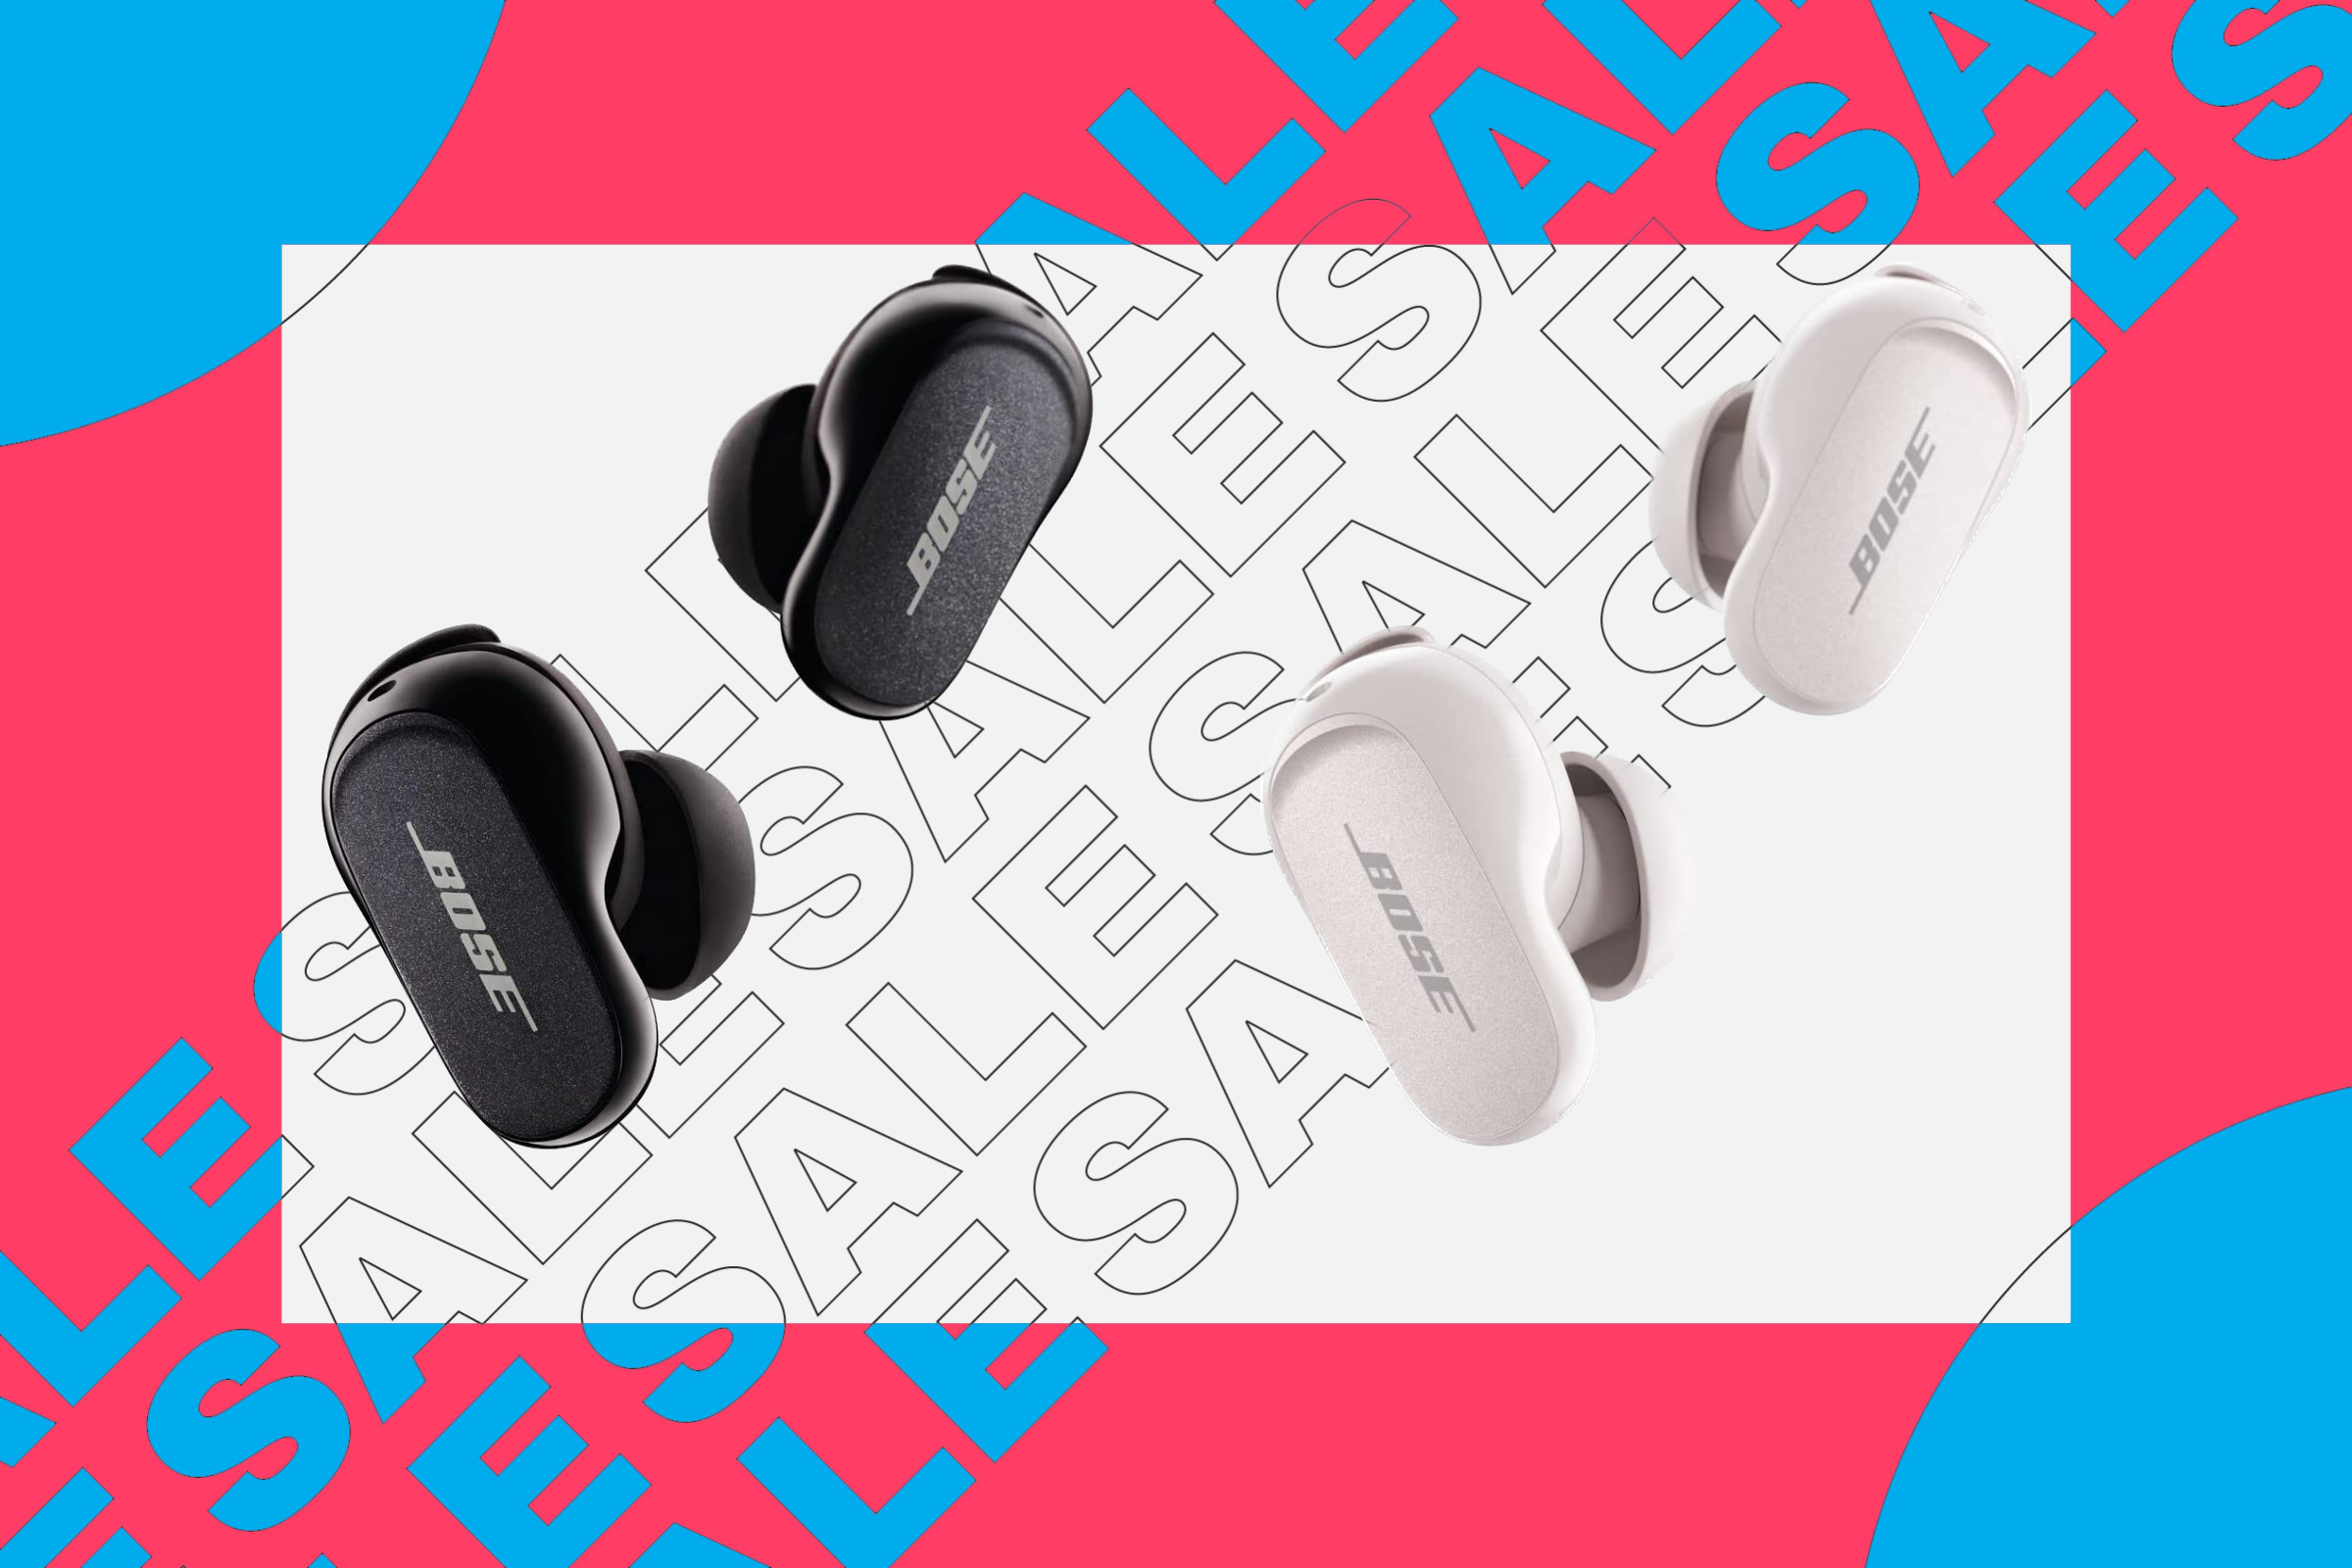 Bose QuietComfort Earbuds II drop $50 for the first time ever in this Black Friday deal